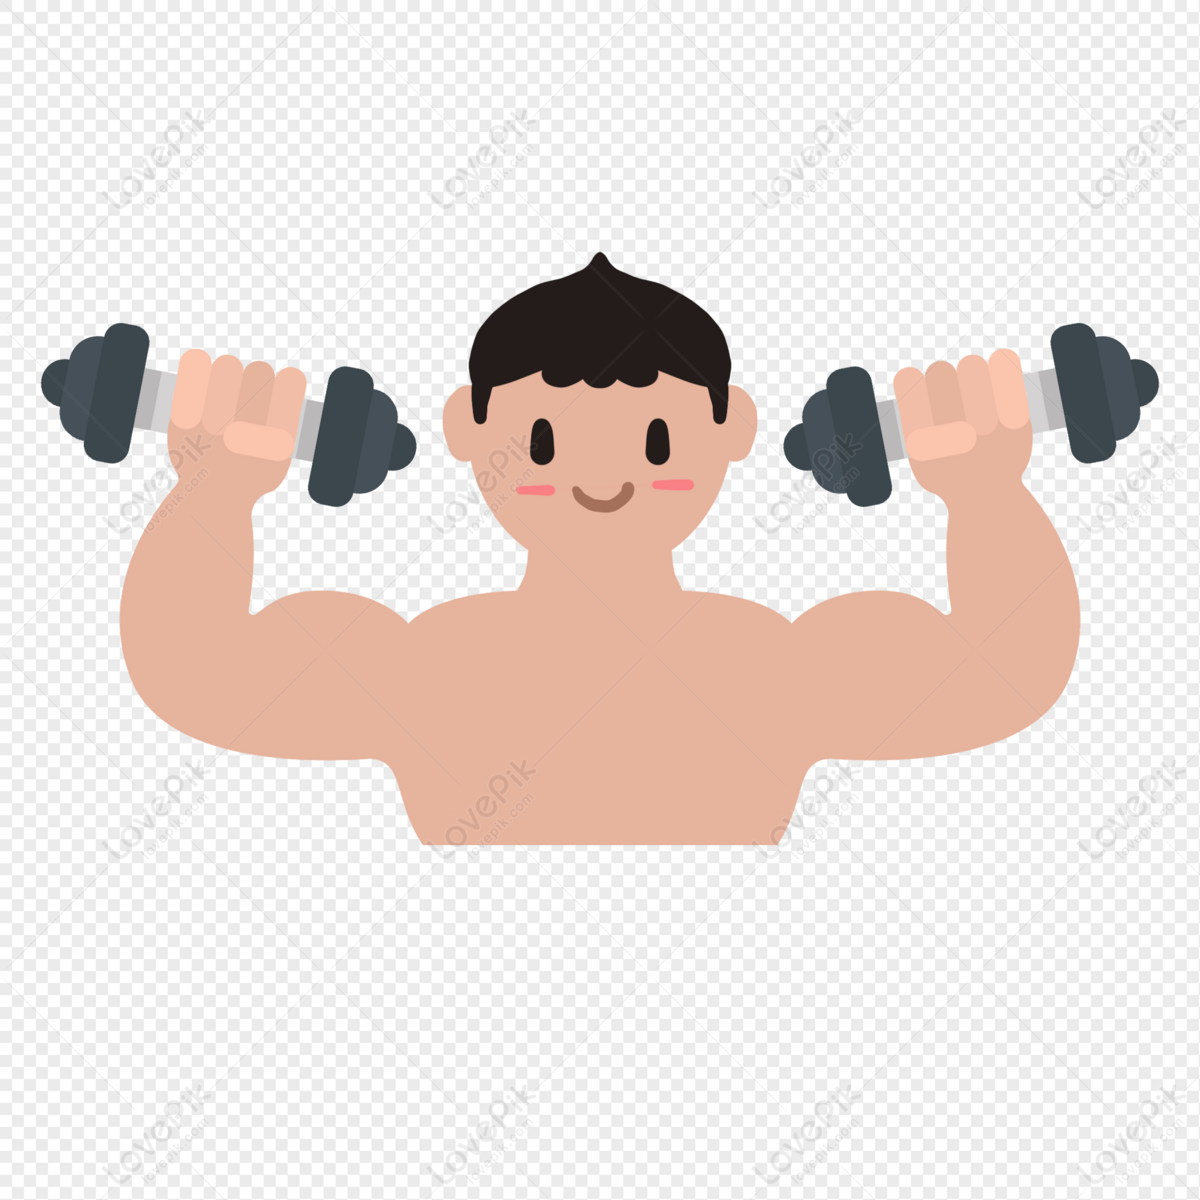 Cartoon Muscular Man Lifting Dumbbells Illustration PNG Transparent And  Clipart Image For Free Download - Lovepik | 401263936